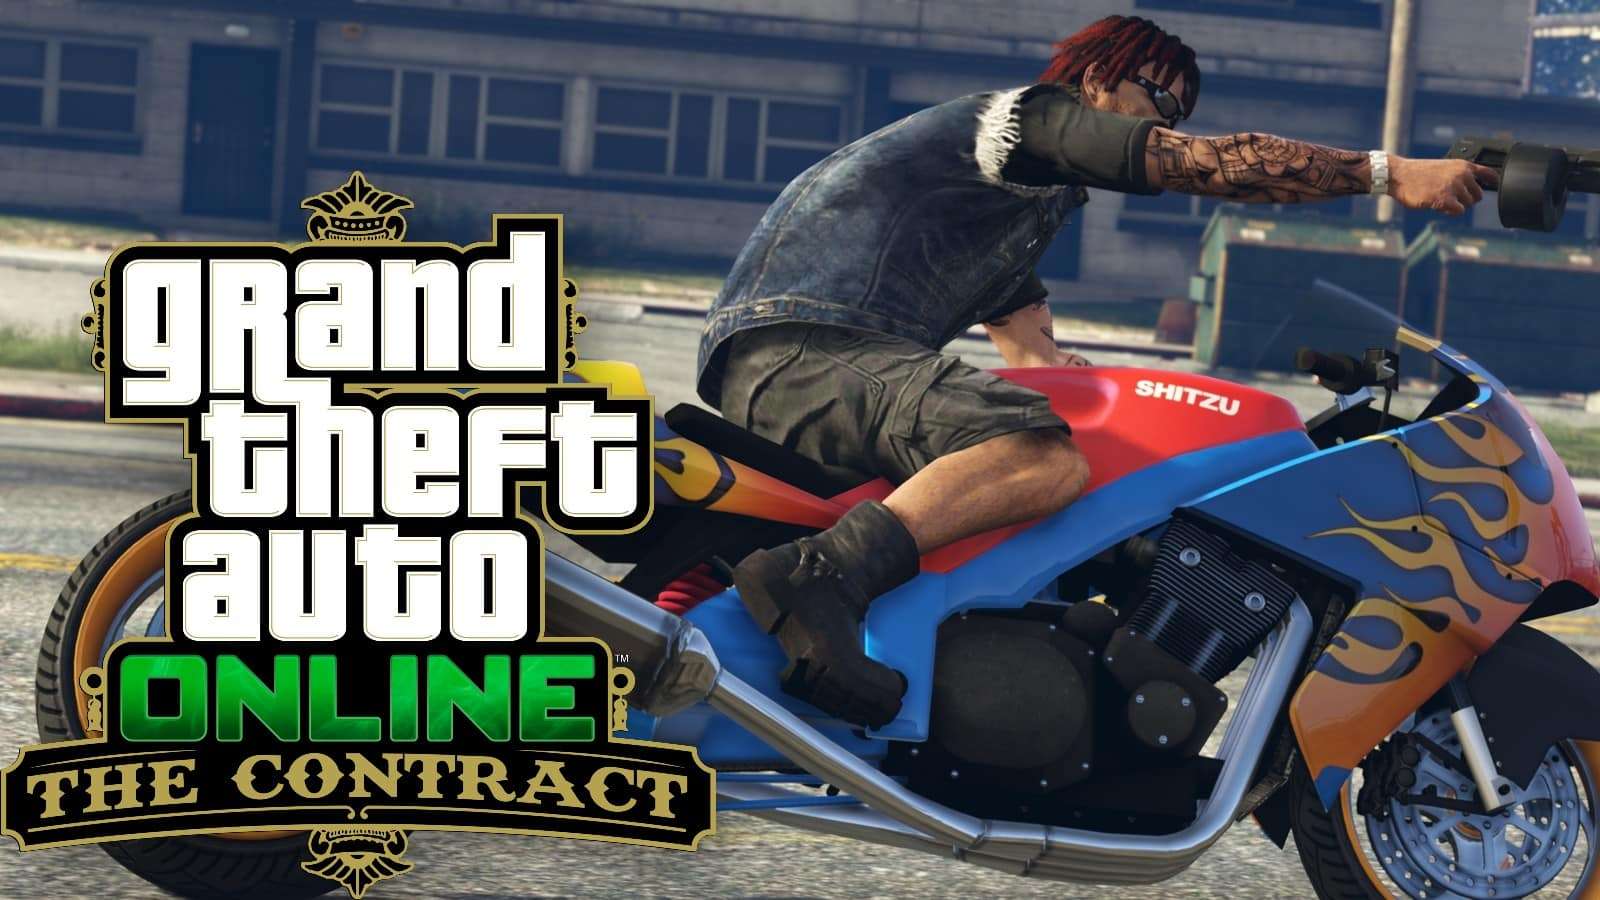 GTA Online's The Contract update has made things a little wonky for NPCs